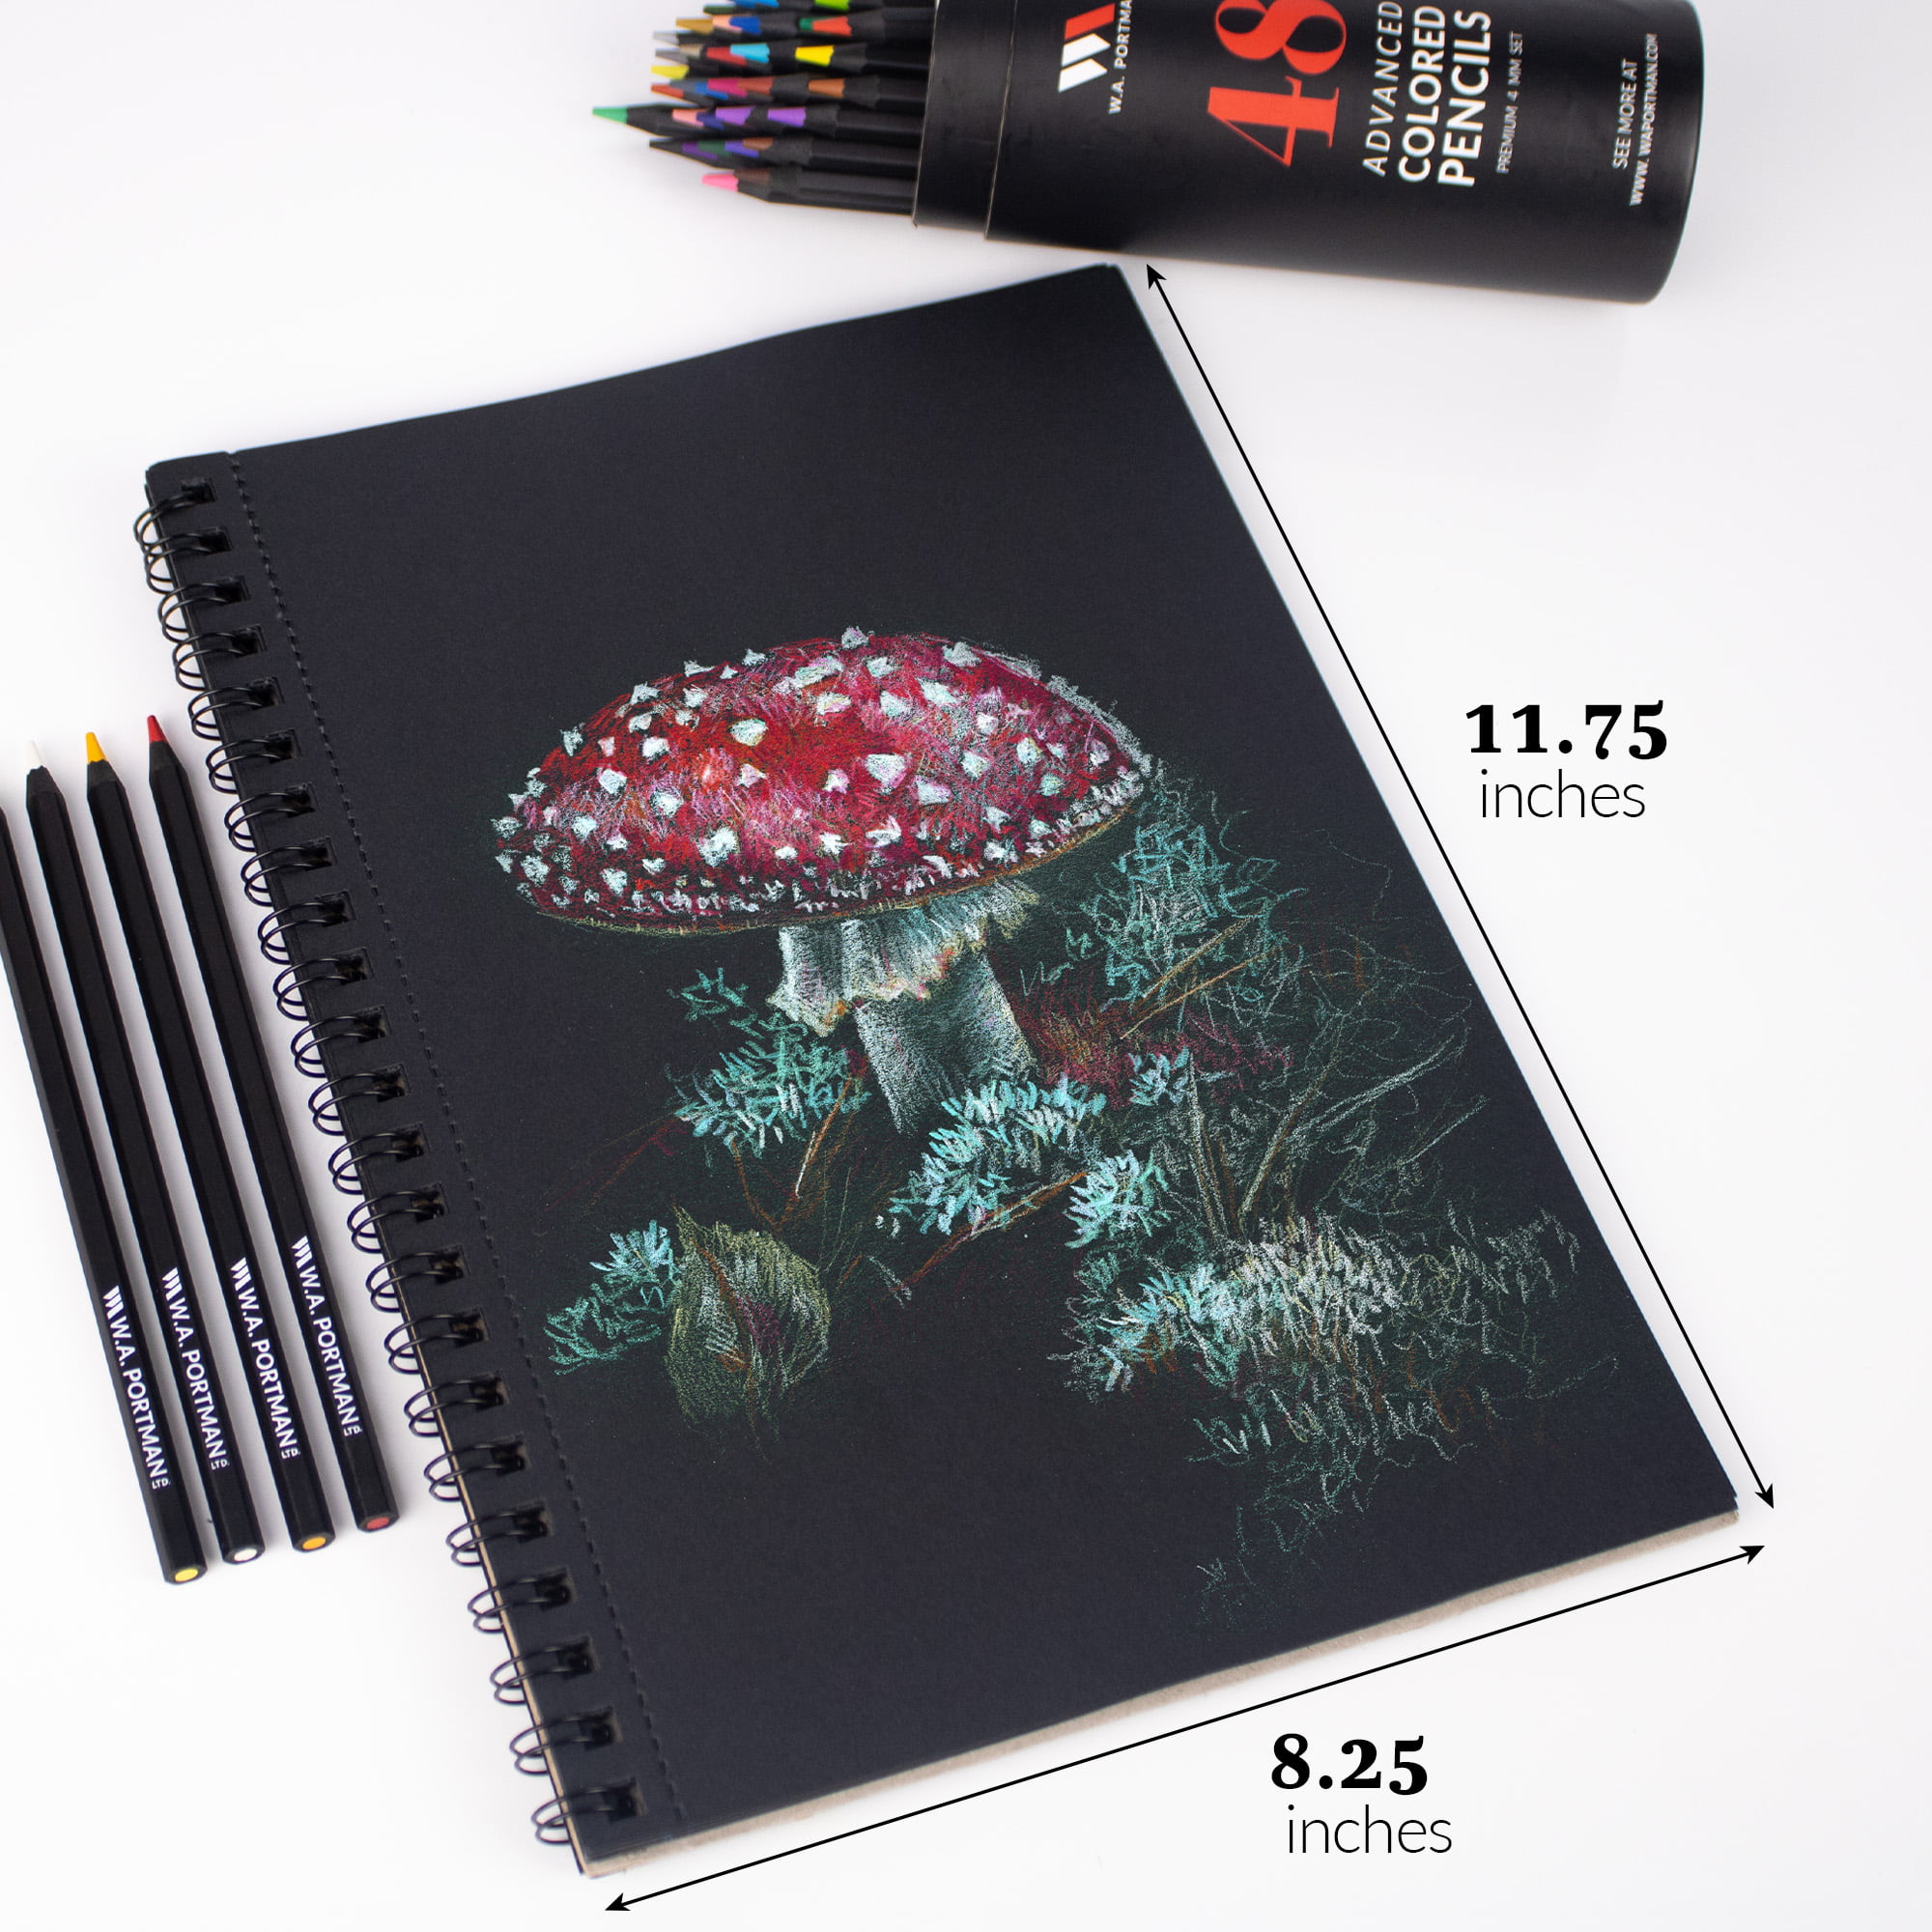 WA Portman A4 Marker Sketchbook, 60 Sheets of Bleed-Proof White Marker Paper  for Drawing and Sketching 